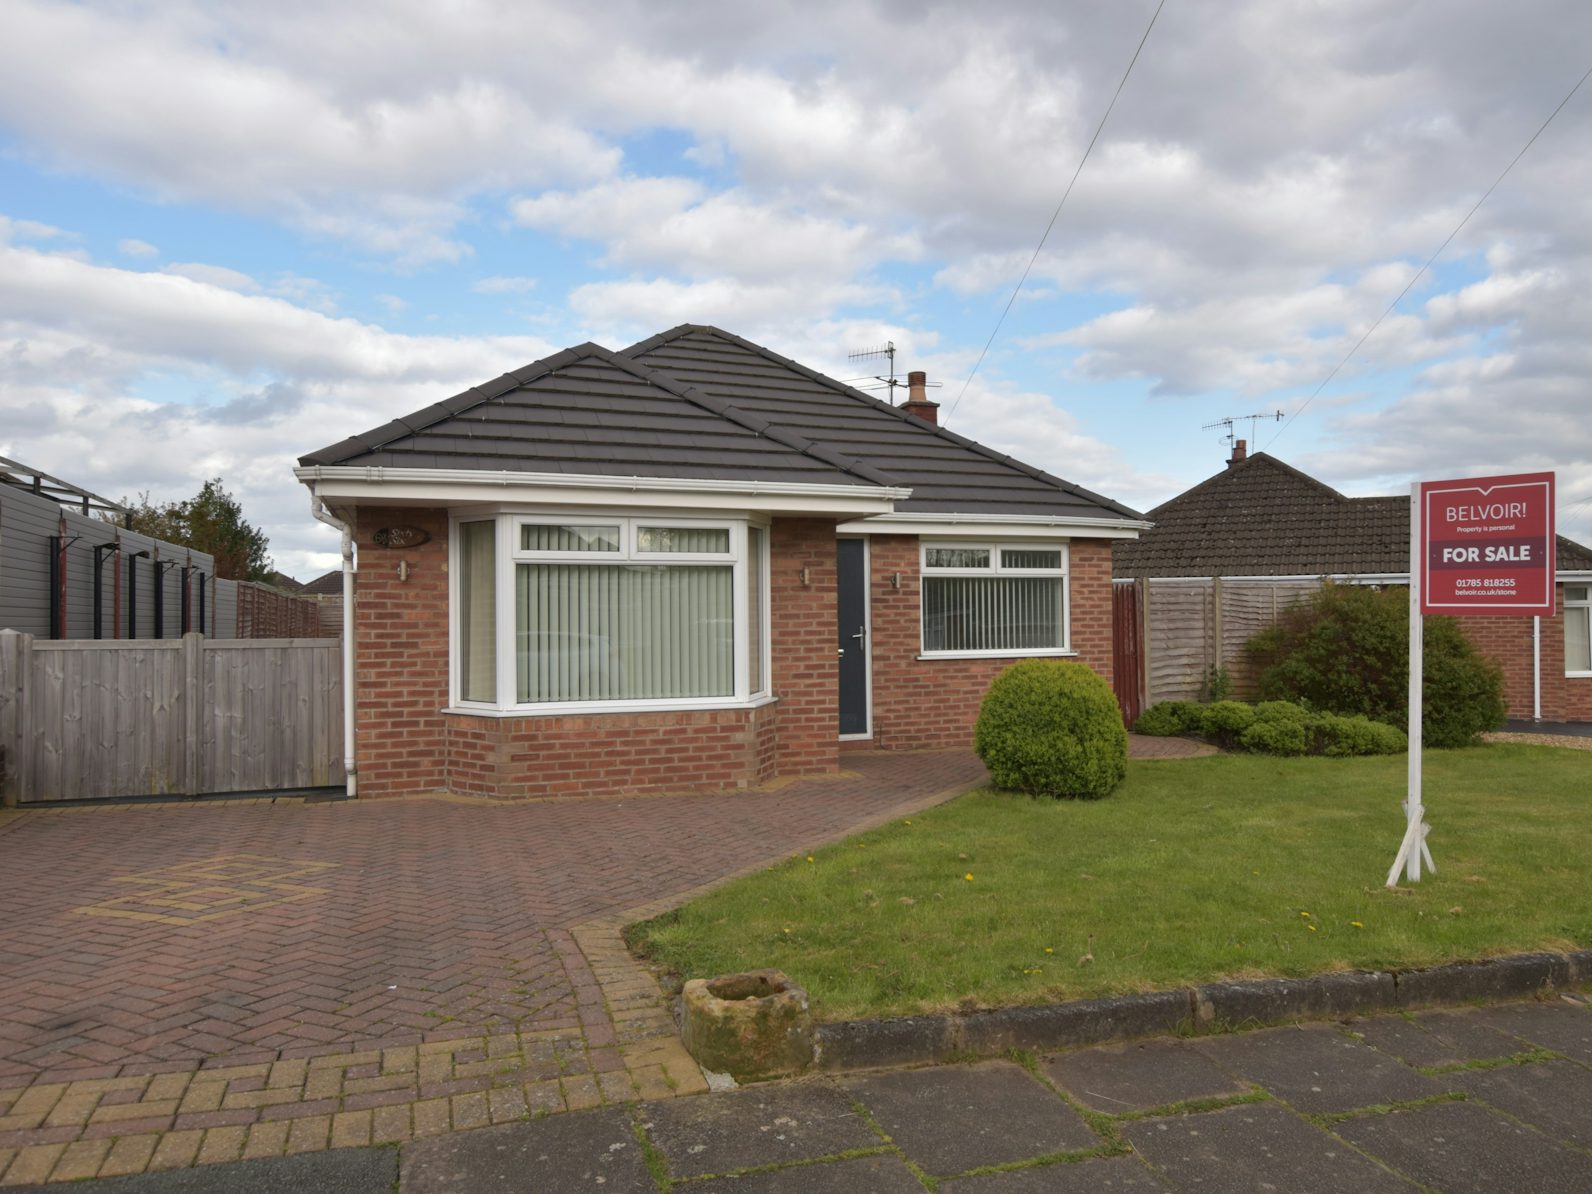 Bungalow for sale on Trentley Road Trentham, Stoke On Trent, ST4